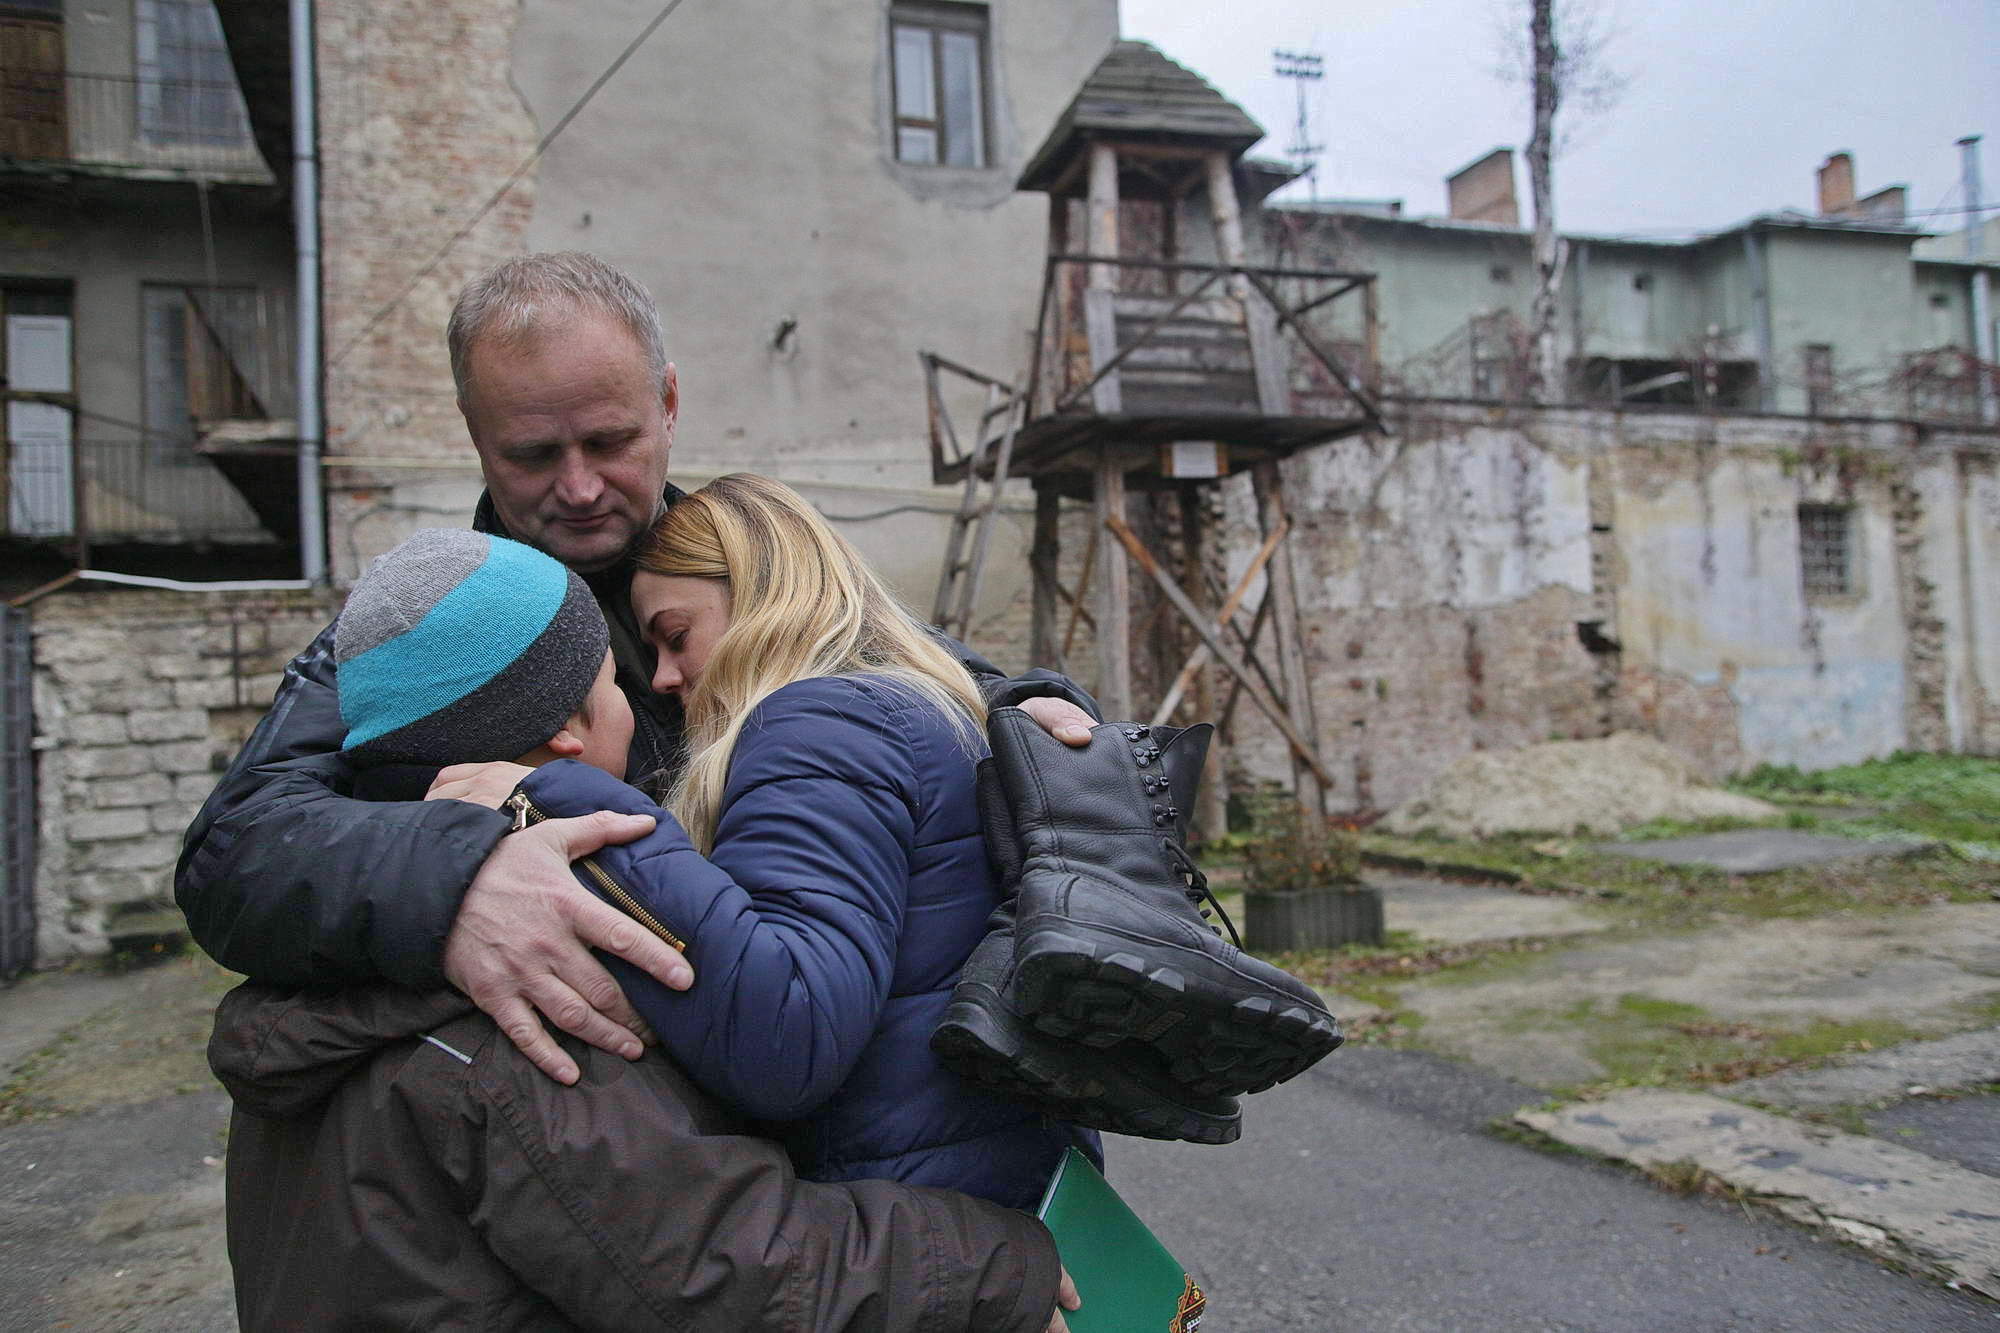 Serhiy Kodman (C) hugs his daughter and grandson in Ternopil on Nov. 29. He also carries boots that belong to his son Oleksiy, a soldier of the 56th Brigade, who has been imprisoned in the Russian-occupied part of Donetsk Oblast for more than two years. (Rostyslav Kovalchuk)